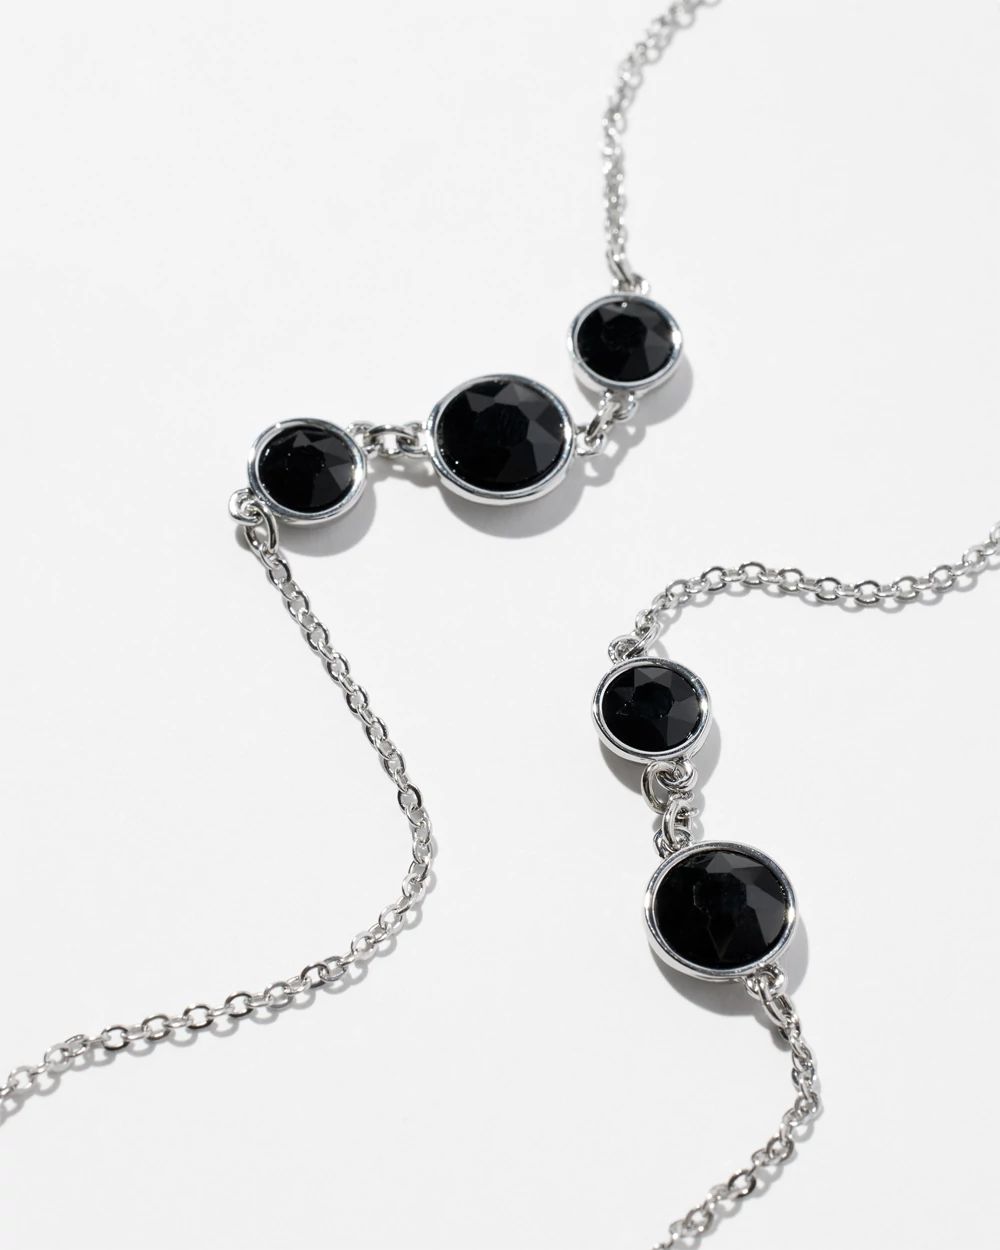 Silver Black Bezel Statement Necklace click to view larger image.